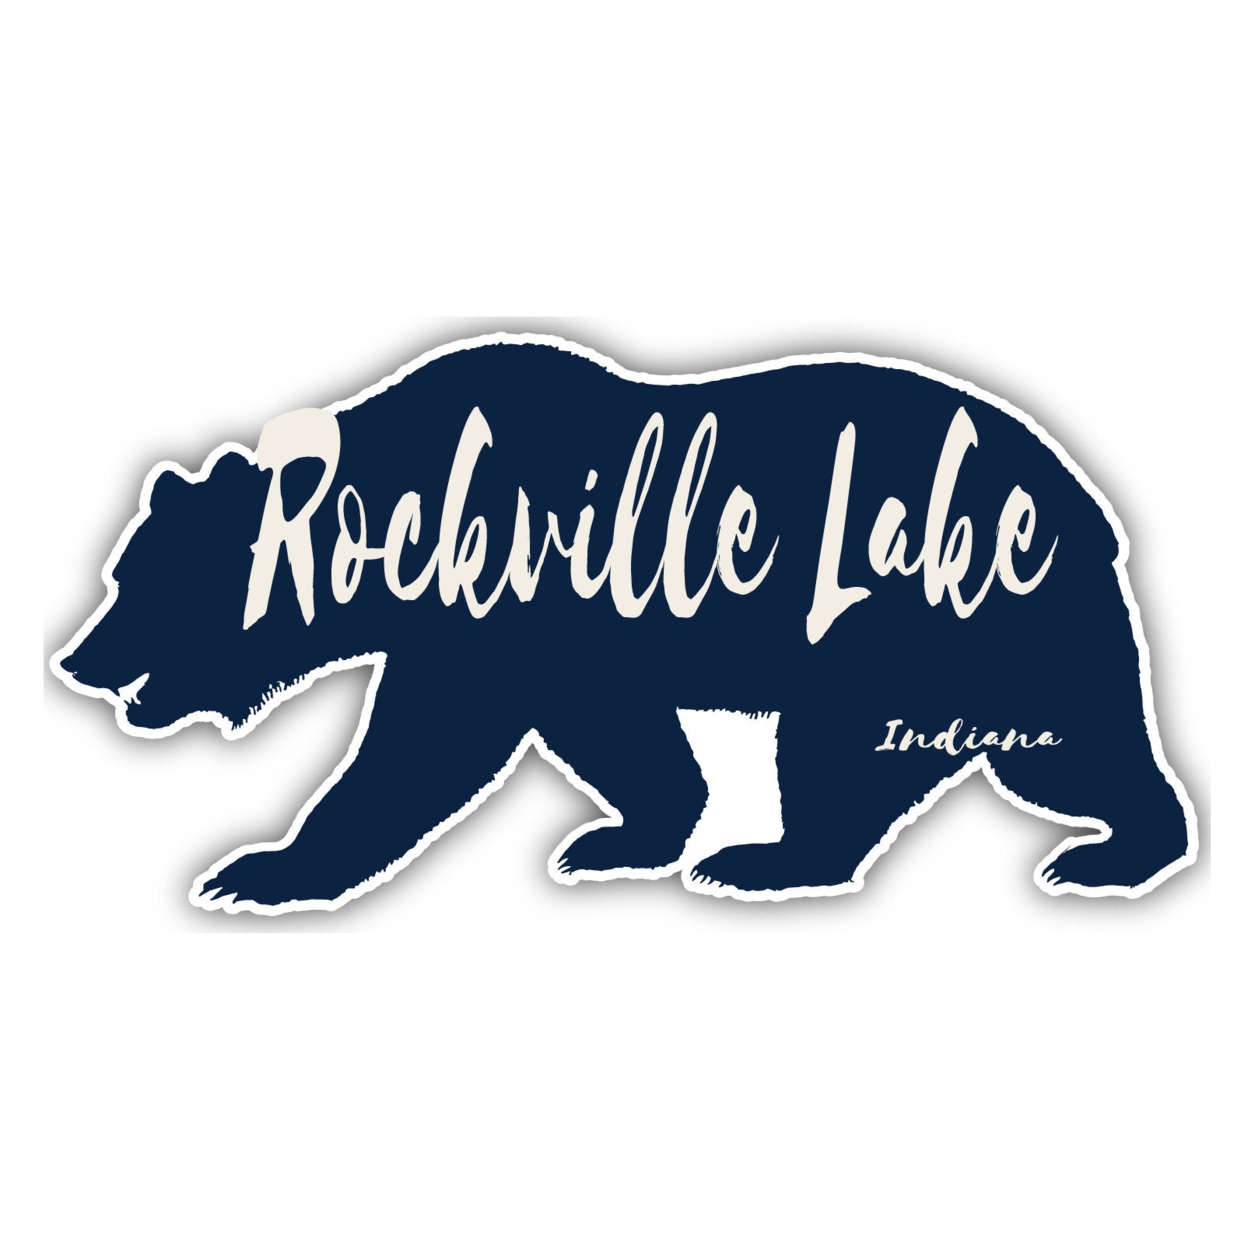 Rockville Lake Indiana Souvenir Decorative Stickers (Choose Theme And Size) - Single Unit, 4-Inch, Great Outdoors